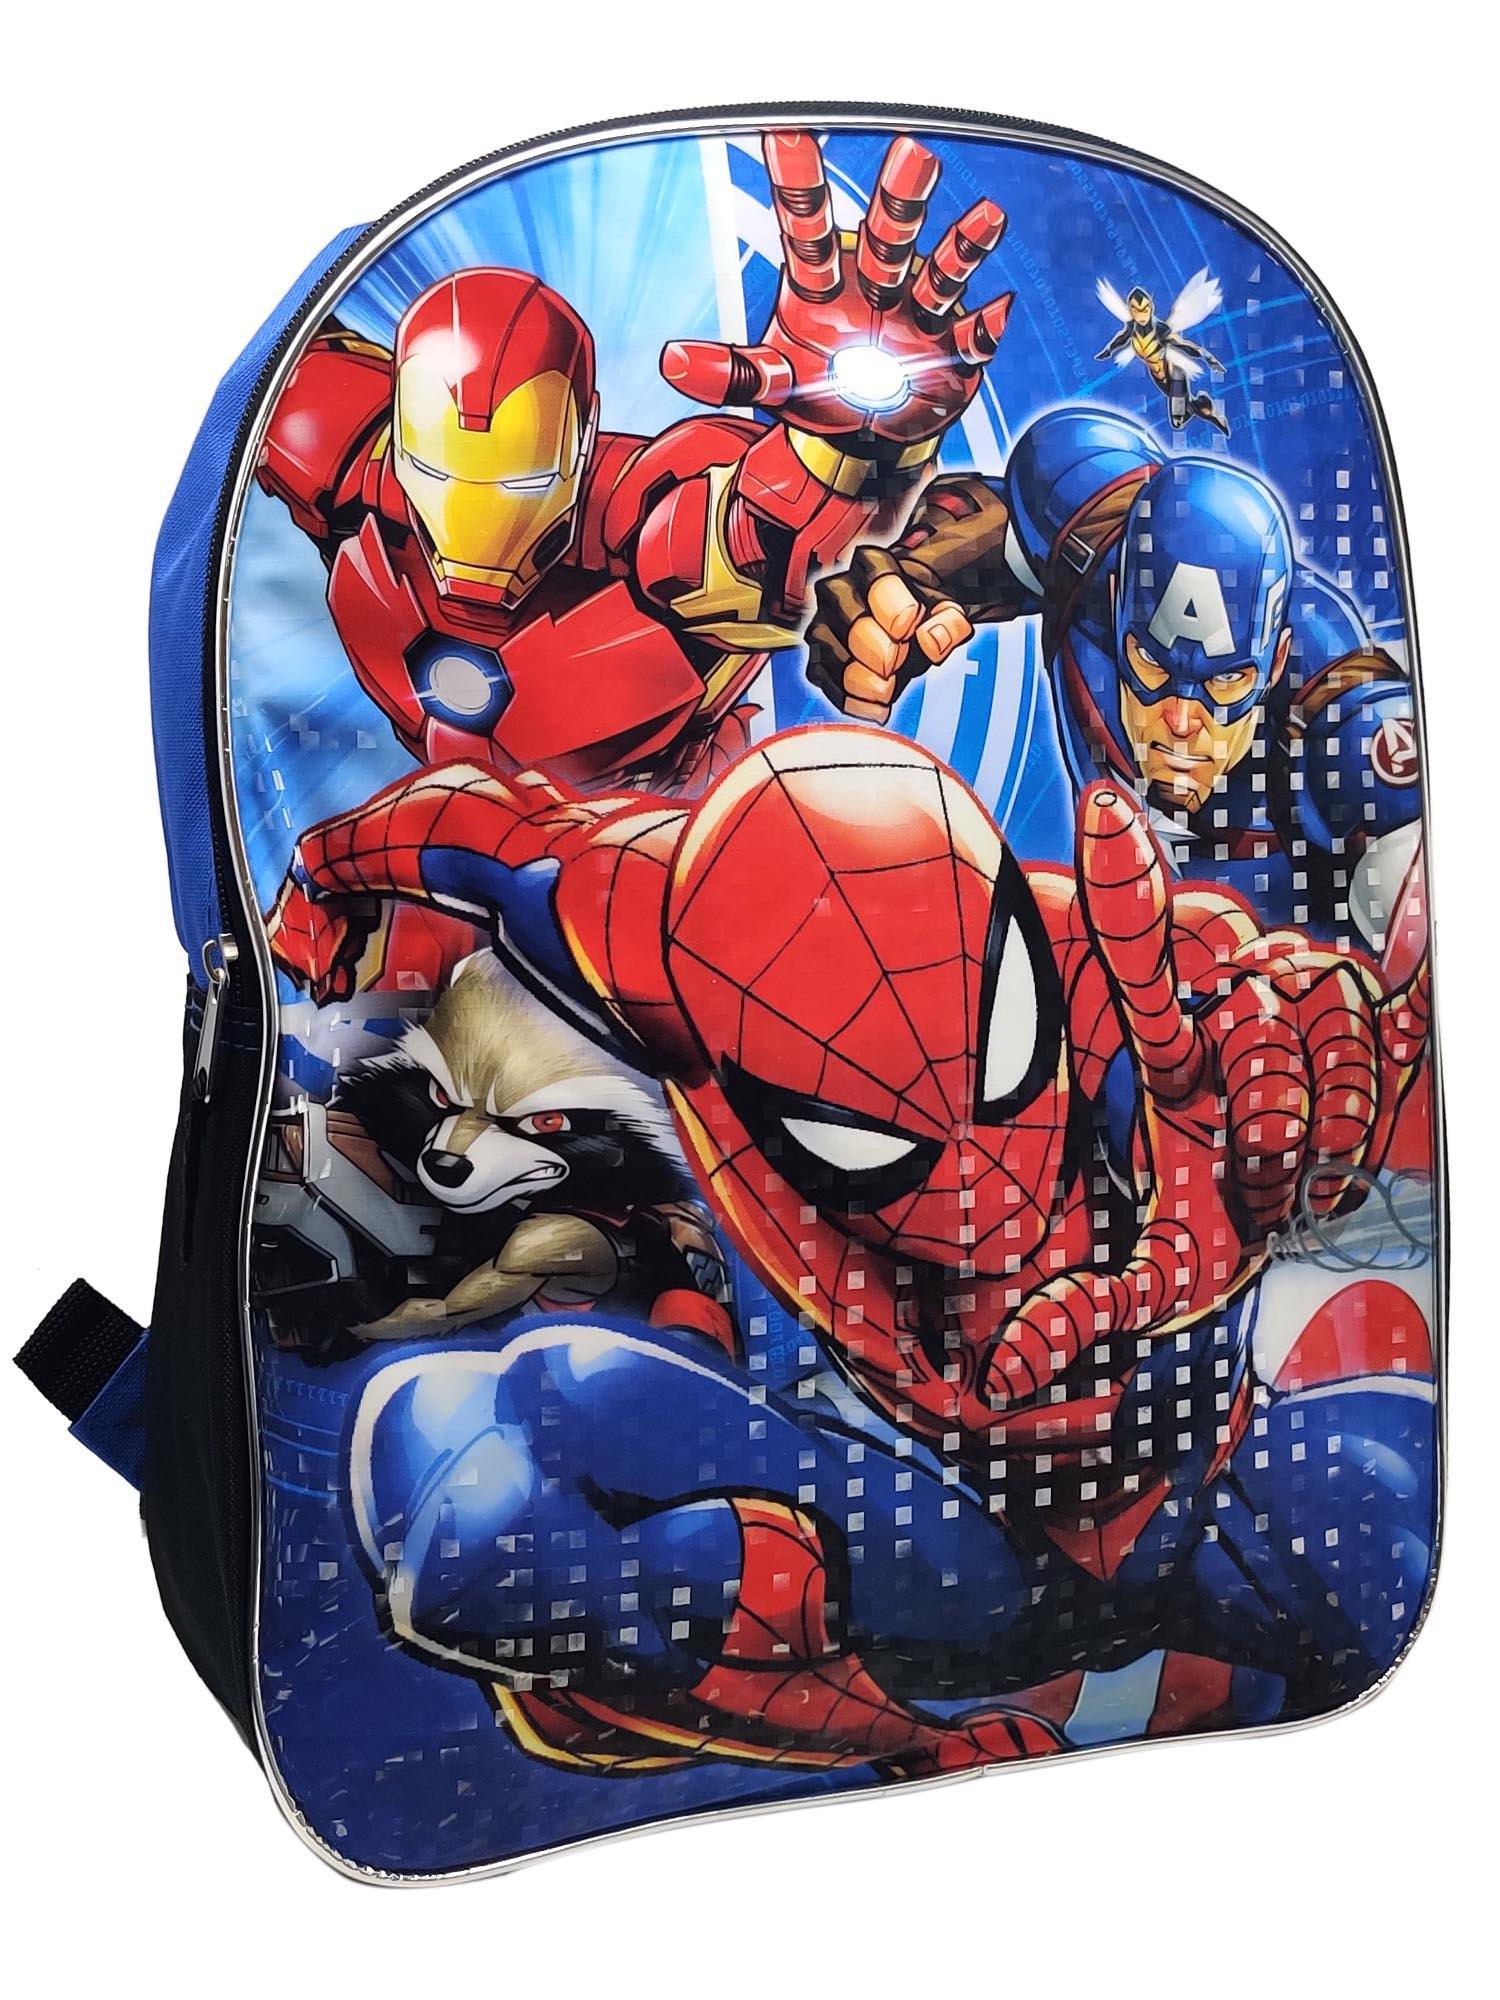 Marvel ® 3D Iron Man LED Light Eyes 15.6in Laptop Bag Case - Universal -  Universal - Mobile / Tablet - Luxurious Covers